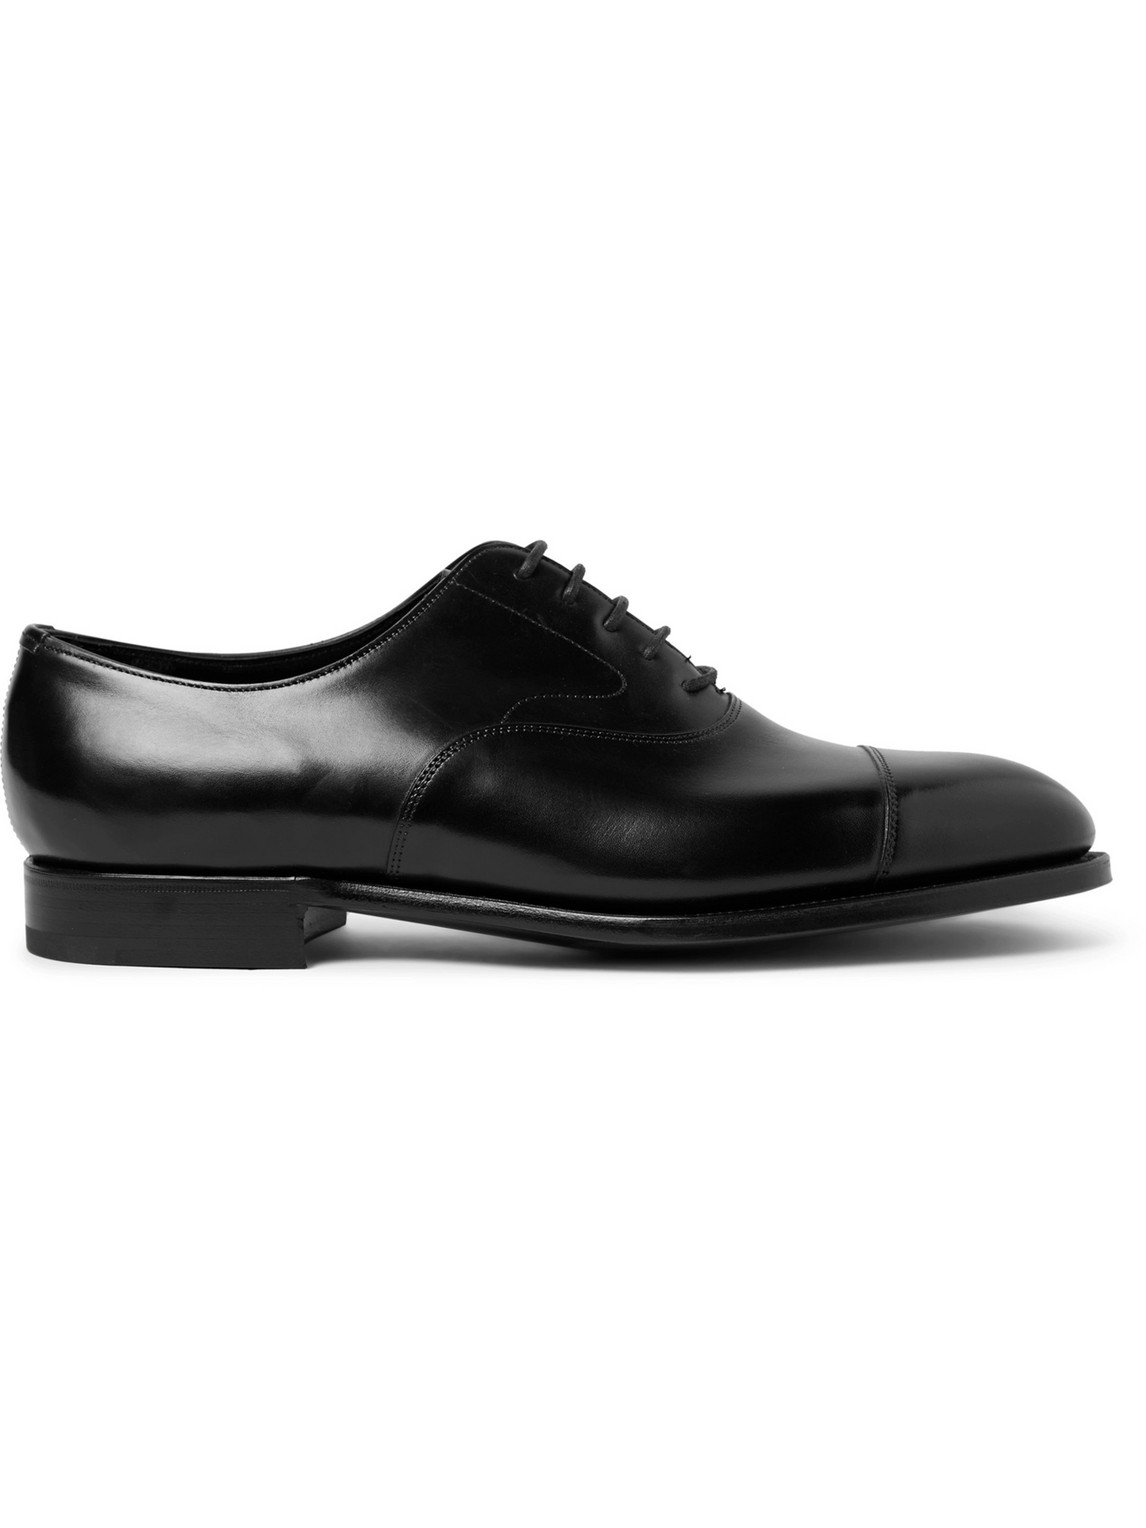 EDWARD GREEN CHELSEA CAP-TOE BURNISHED-LEATHER OXFORD SHOES